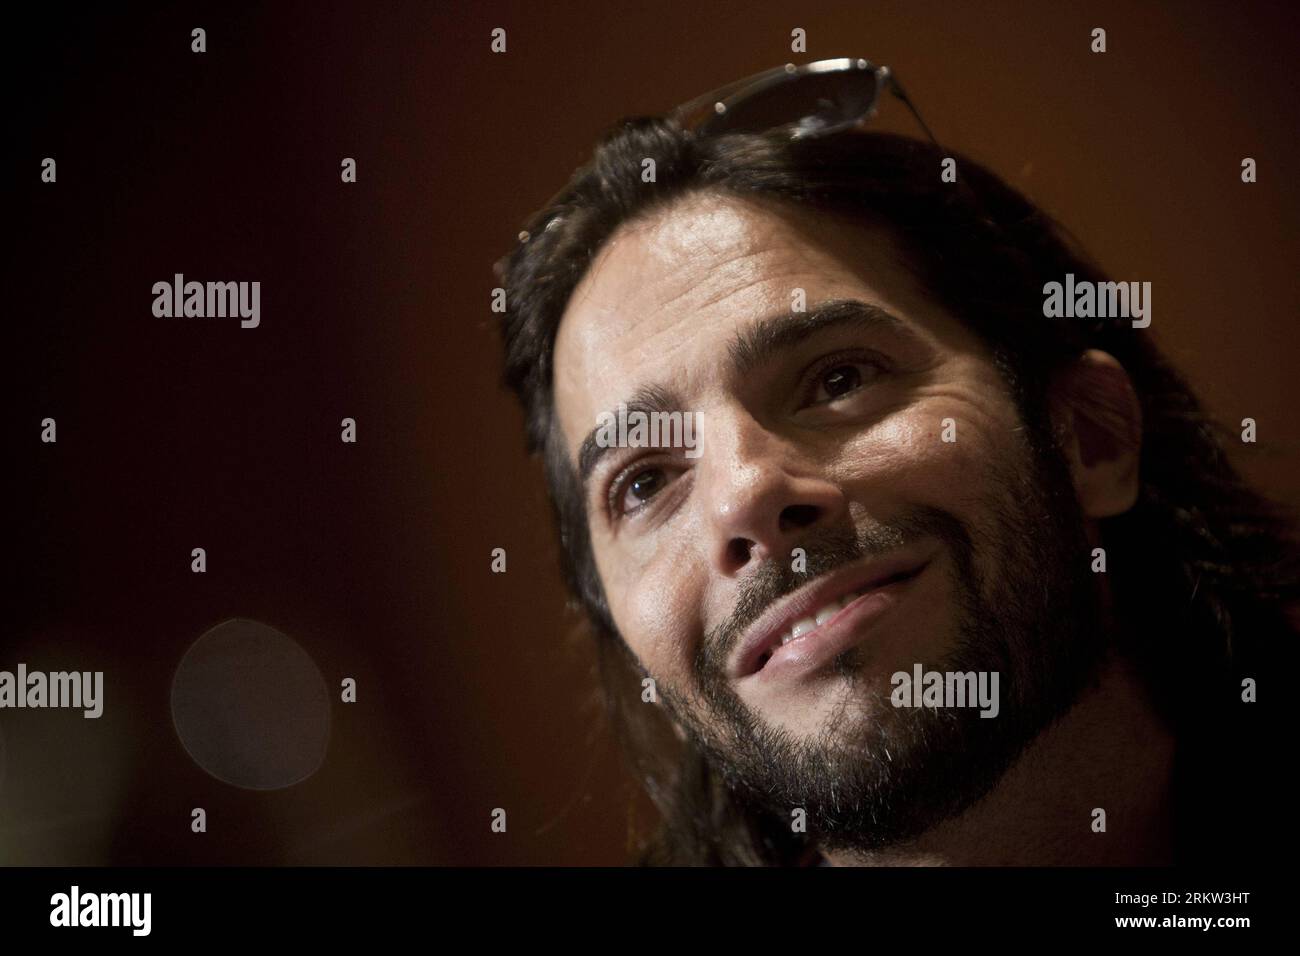 Bildnummer: 58609816  Datum: 18.10.2012  Copyright: imago/Xinhua MEXICO CITY,  -- Spanish dancer and choreographer Joaquin Cortes attends a press conference in Mexico City, capital of Mexico, Oct. 18, 2012. Joaquin Cortes announced that his show titled Cale will be presented on Oct. 19. (Xinhua/Rodrigo Oropeza) (zf) MEXICO-MEXICO CITY-ENTERTAINMENT-JOAQUIN CORTES PUBLICATIONxNOTxINxCHN people Entertainment Porträt x0x xmb 2012 quer     58609816 Date 18 10 2012 Copyright Imago XINHUA Mexico City Spanish Dancer and Choreographer Joaquin Cortes Attends a Press Conference in Mexico City Capital of Stock Photo